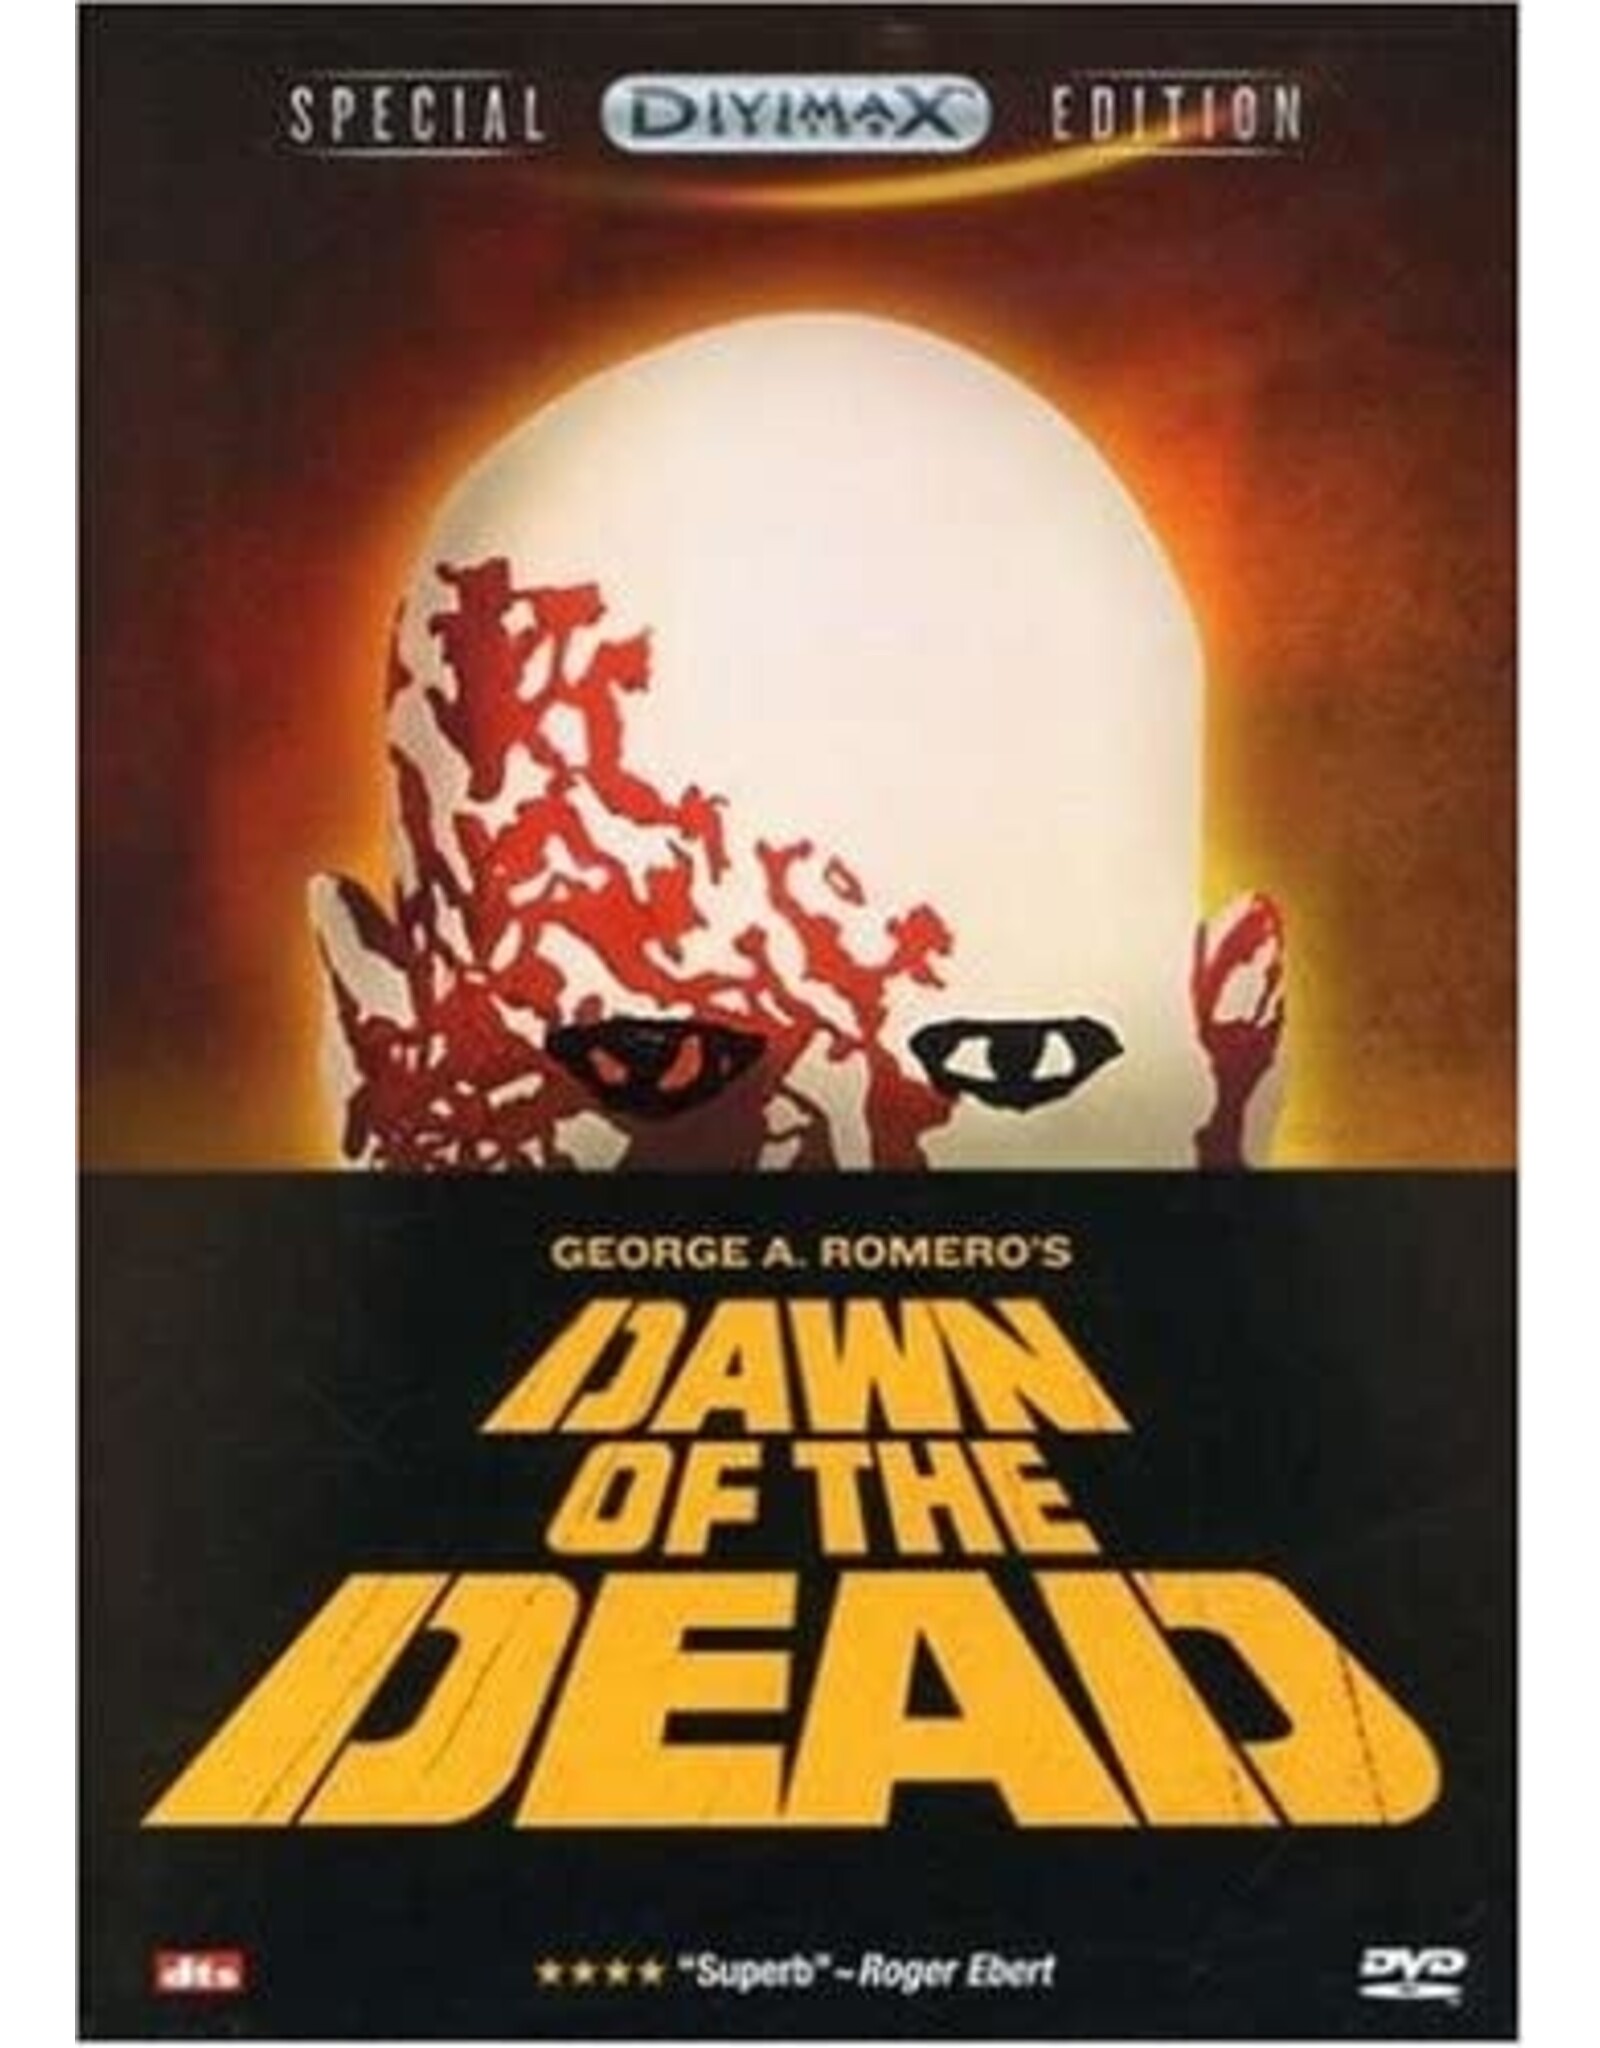 Horror Cult Dawn of the Dead Special Divimax Edition (Used)